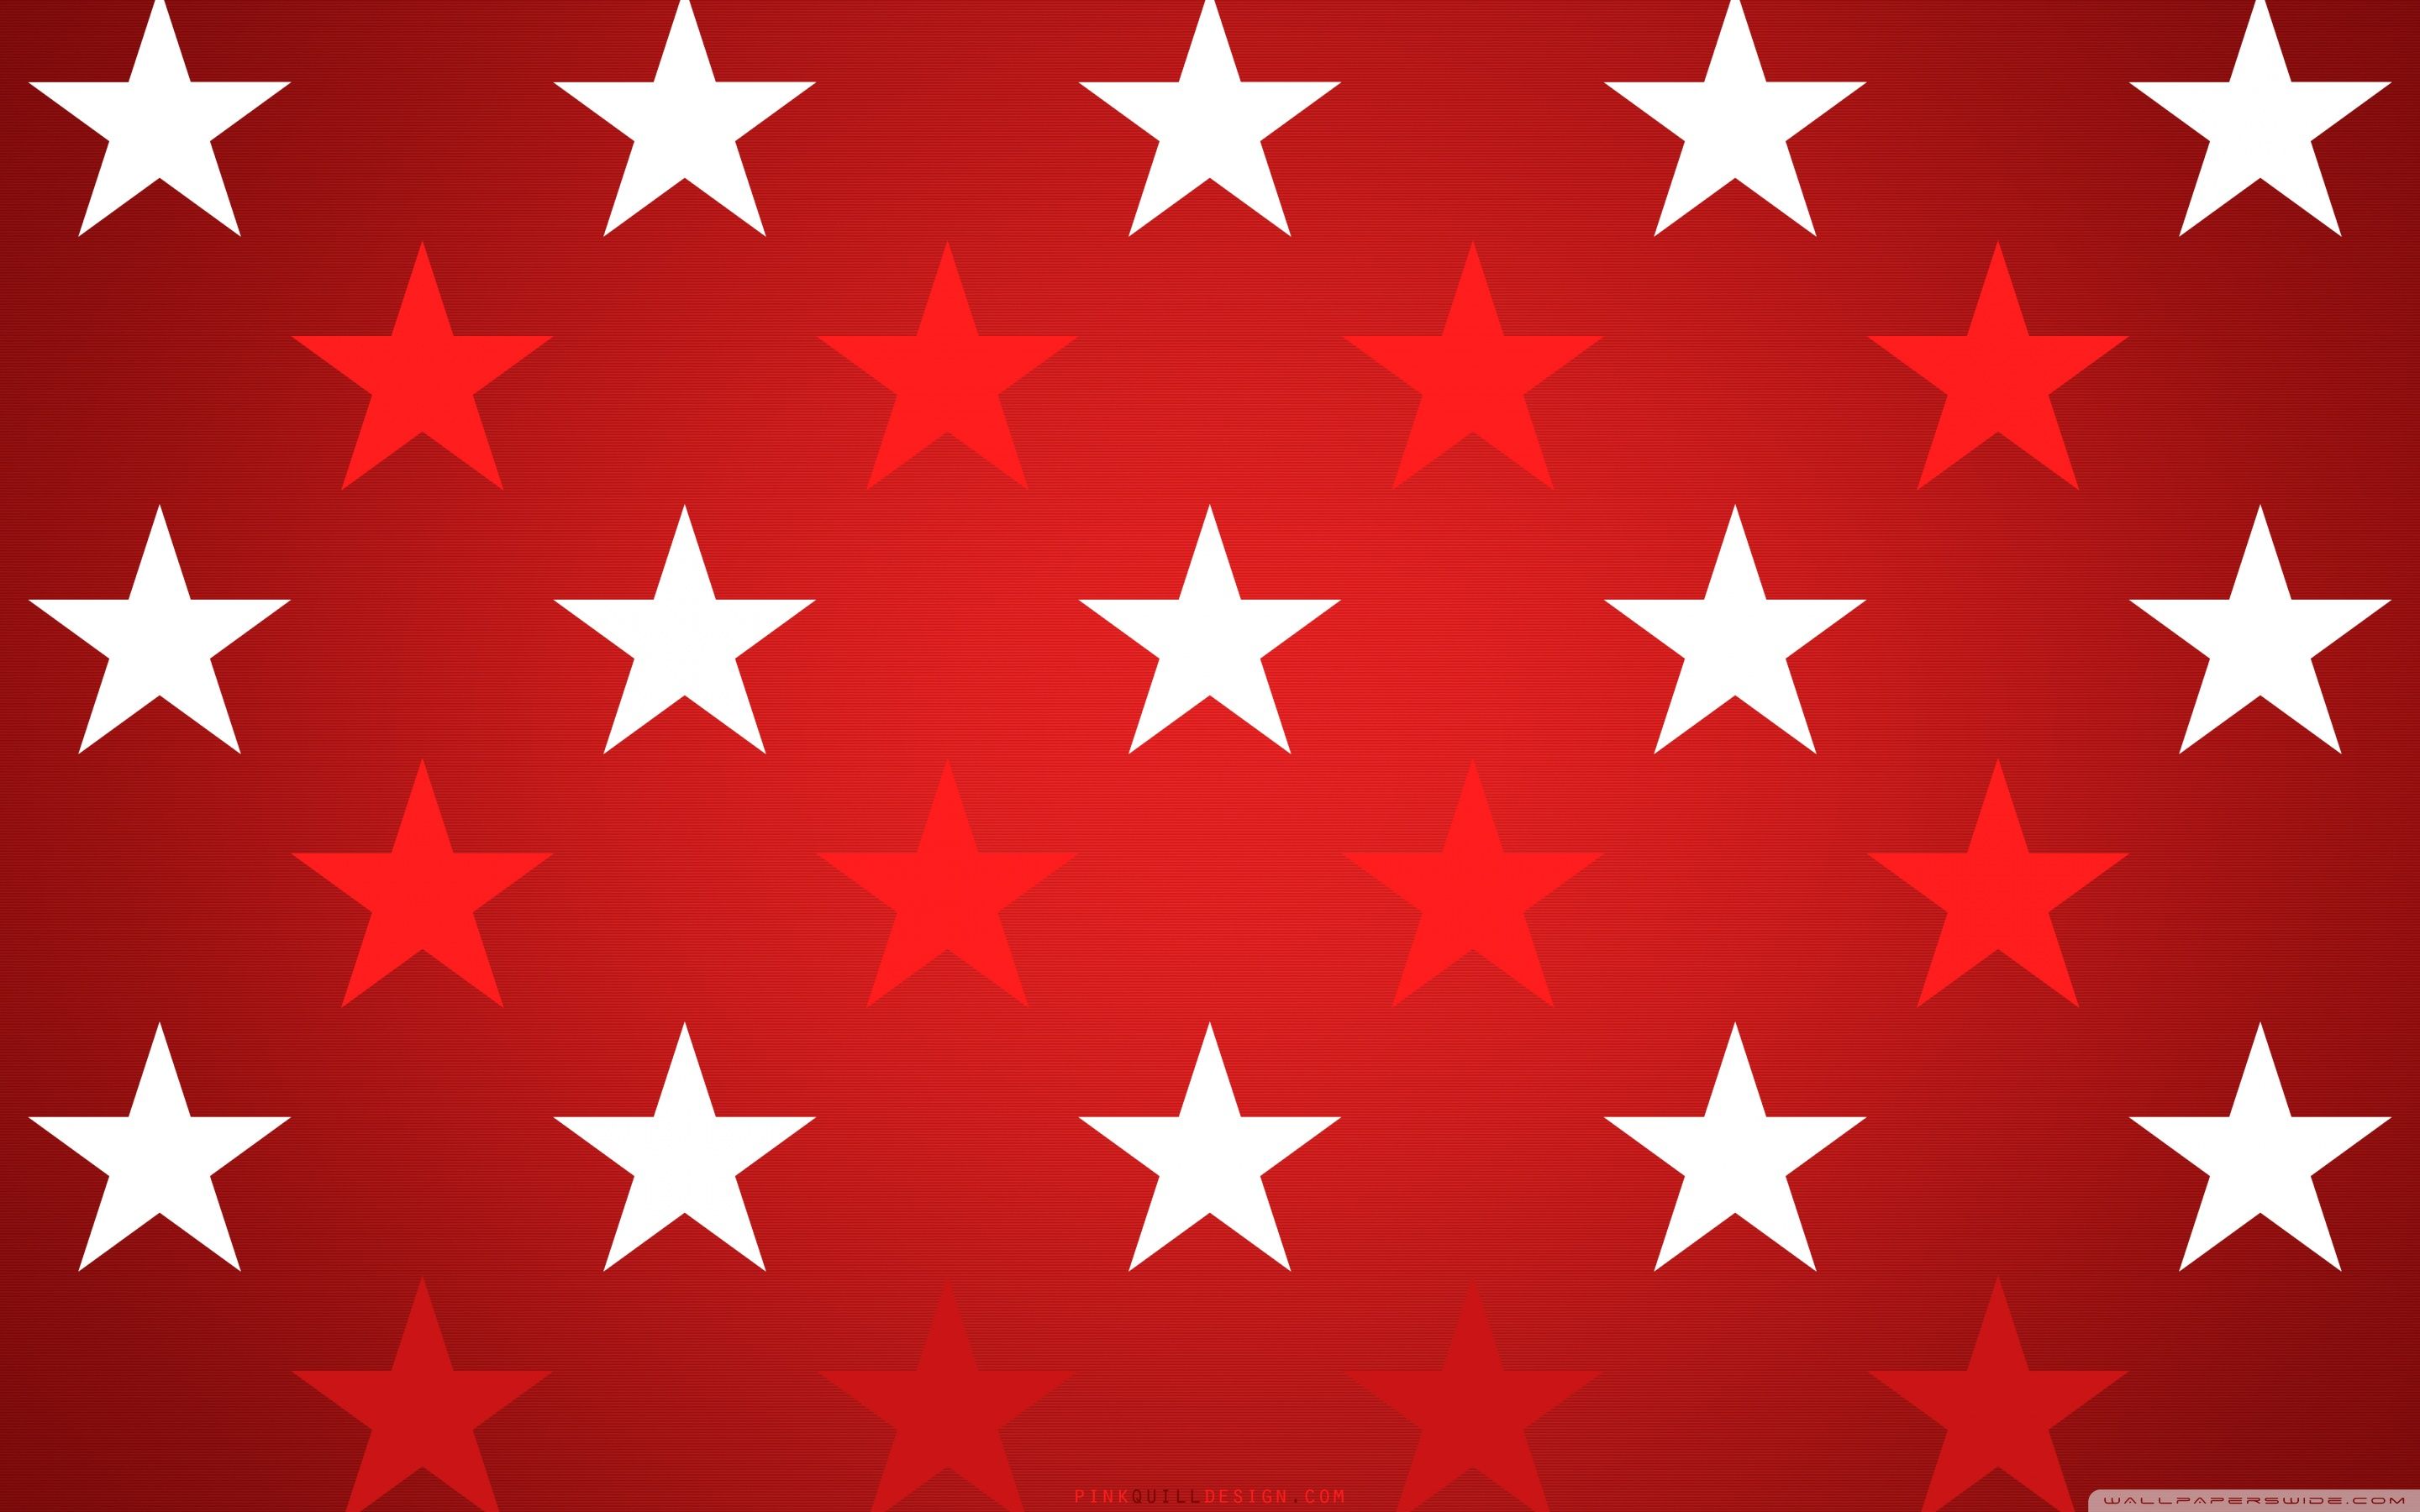 Download Stars Background Red and White UltraHD Wallpaper